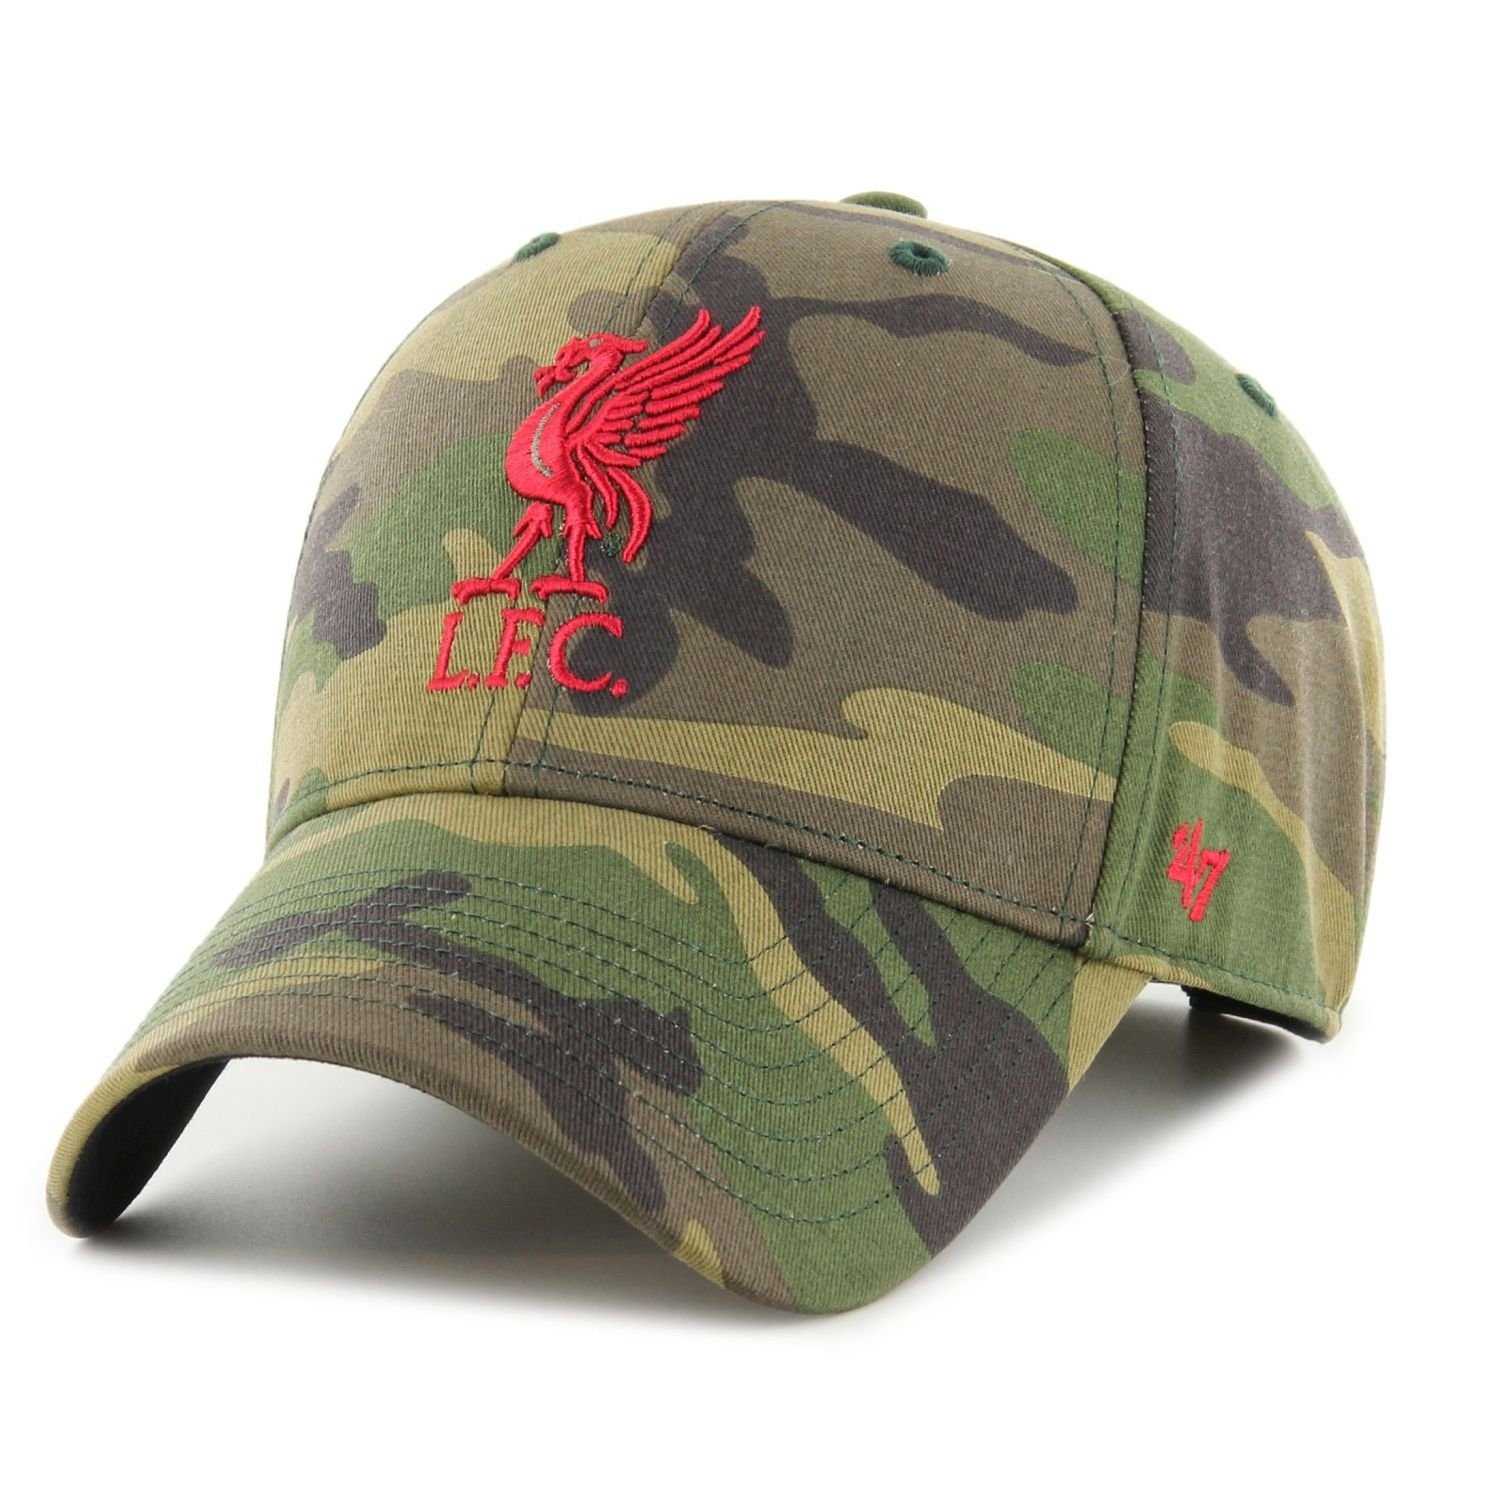 x27;47 Brand Trucker Cap Relaxed Liverpool BACK FC Fit GROVE